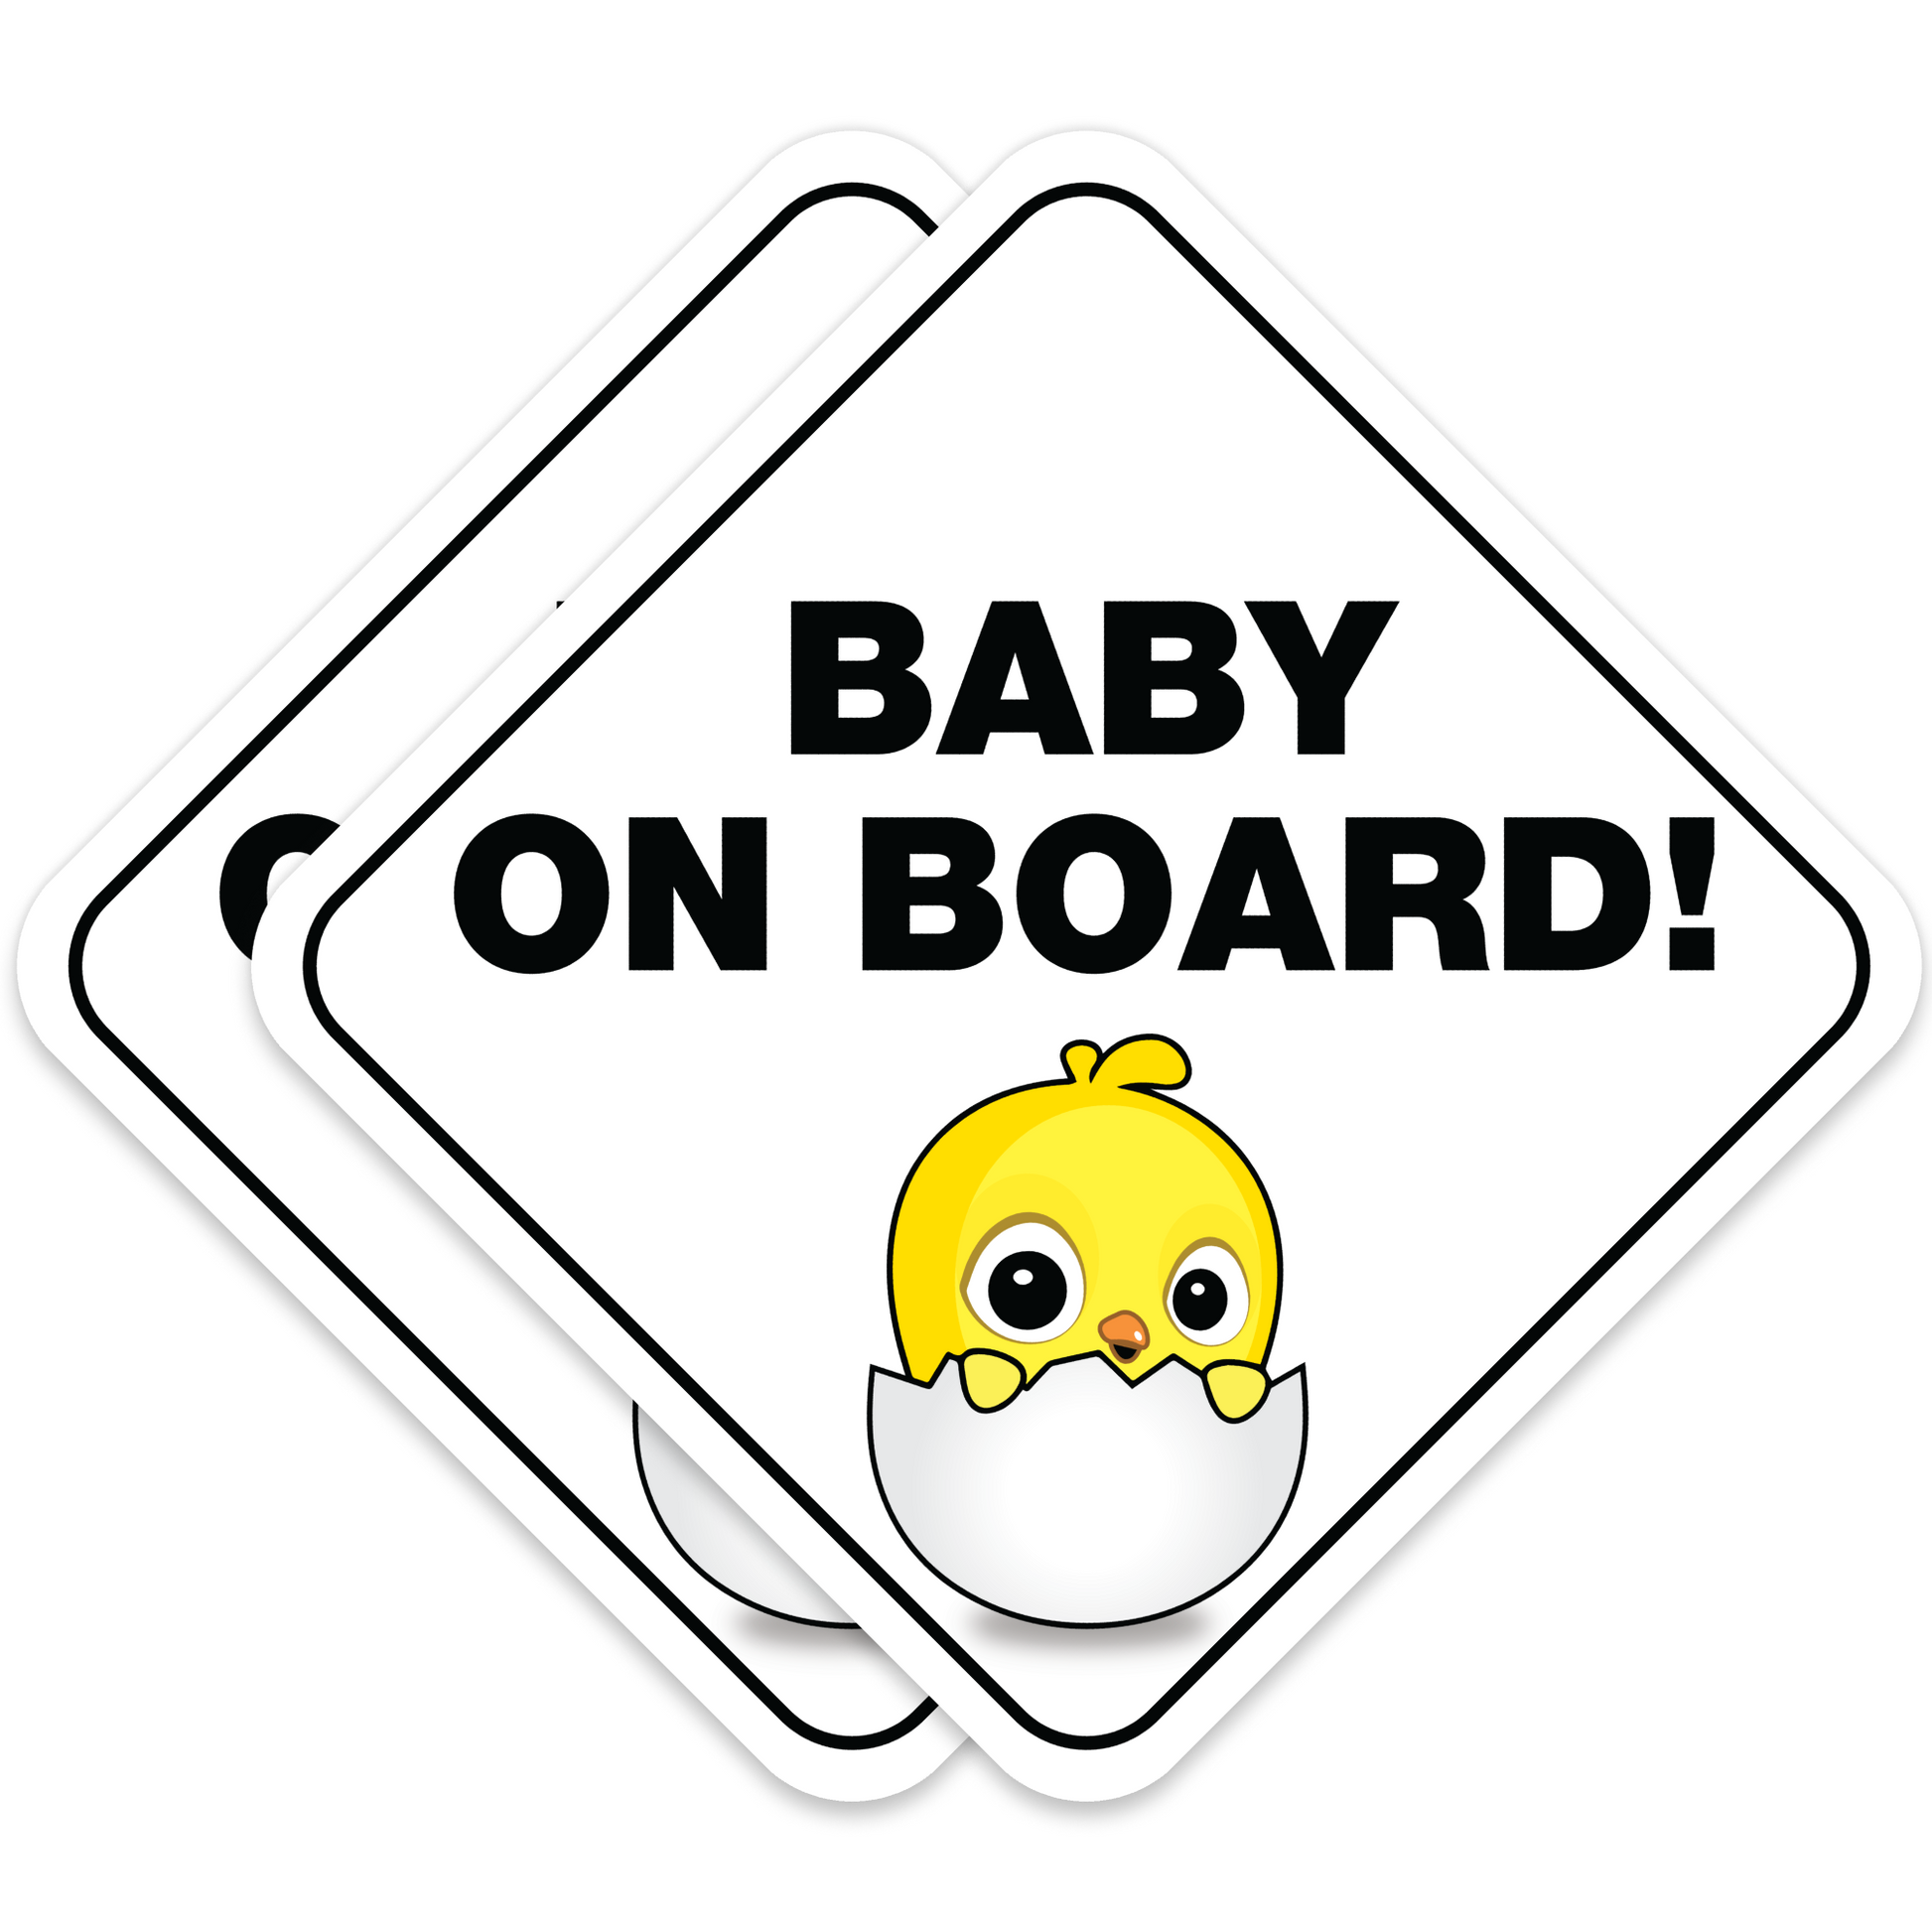 Stickios Baby on Board Vinyl Stickers - Baby Chick - White (2-Pack)